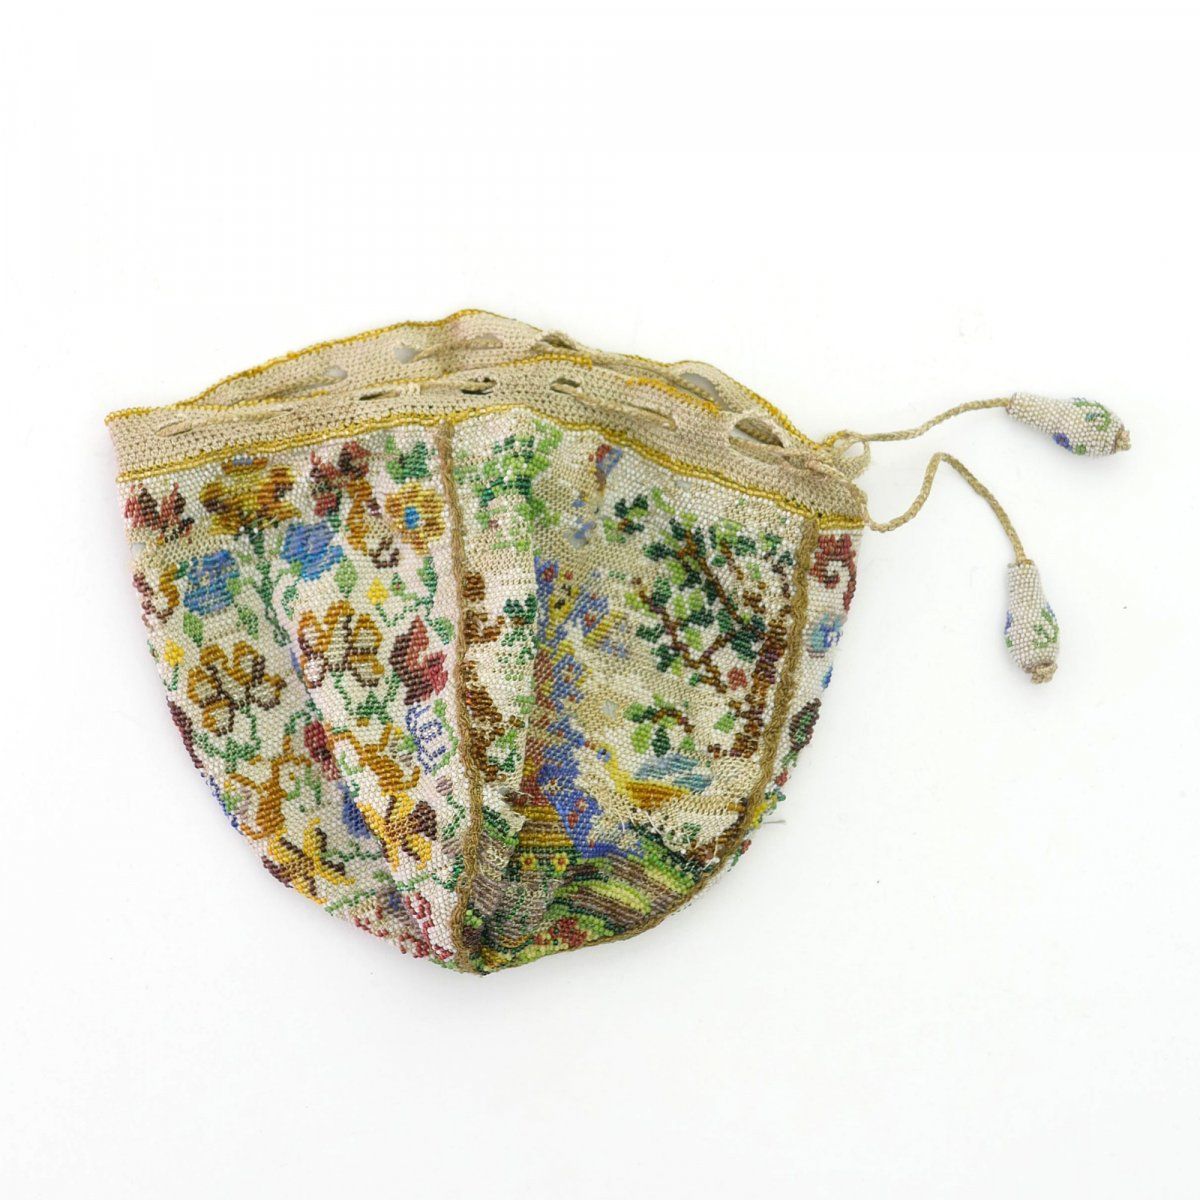 Null Pouch with coat of arms and flowers, c. 1780-1800, H. 11 x 12.5 cm. Polychr&hellip;